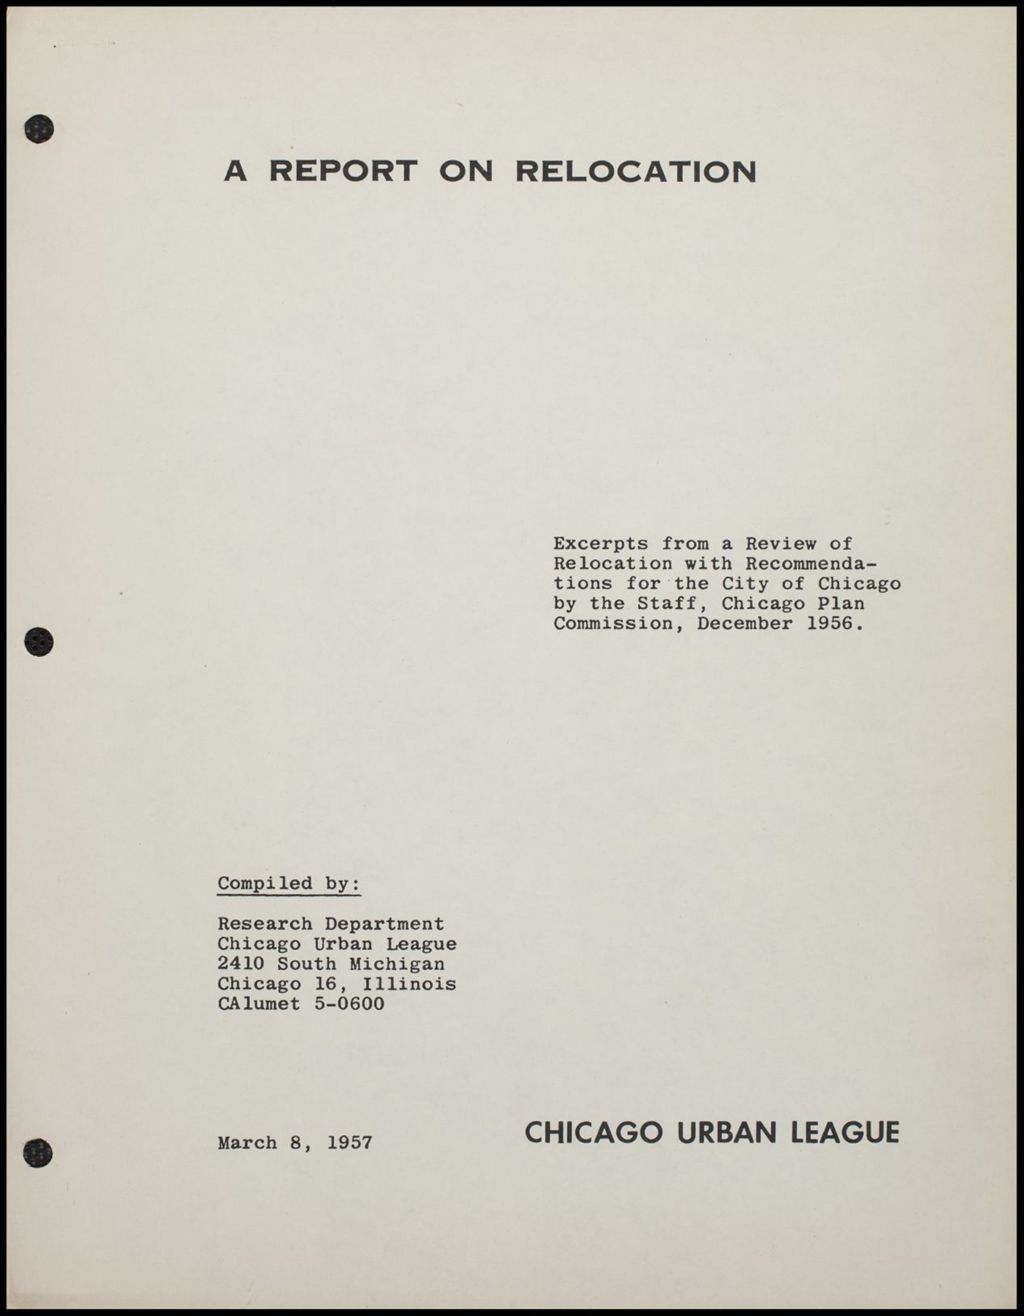 CUL Community Services Advisory Committee Special Data and Reports, 1956-1957 (Folder III-2454)